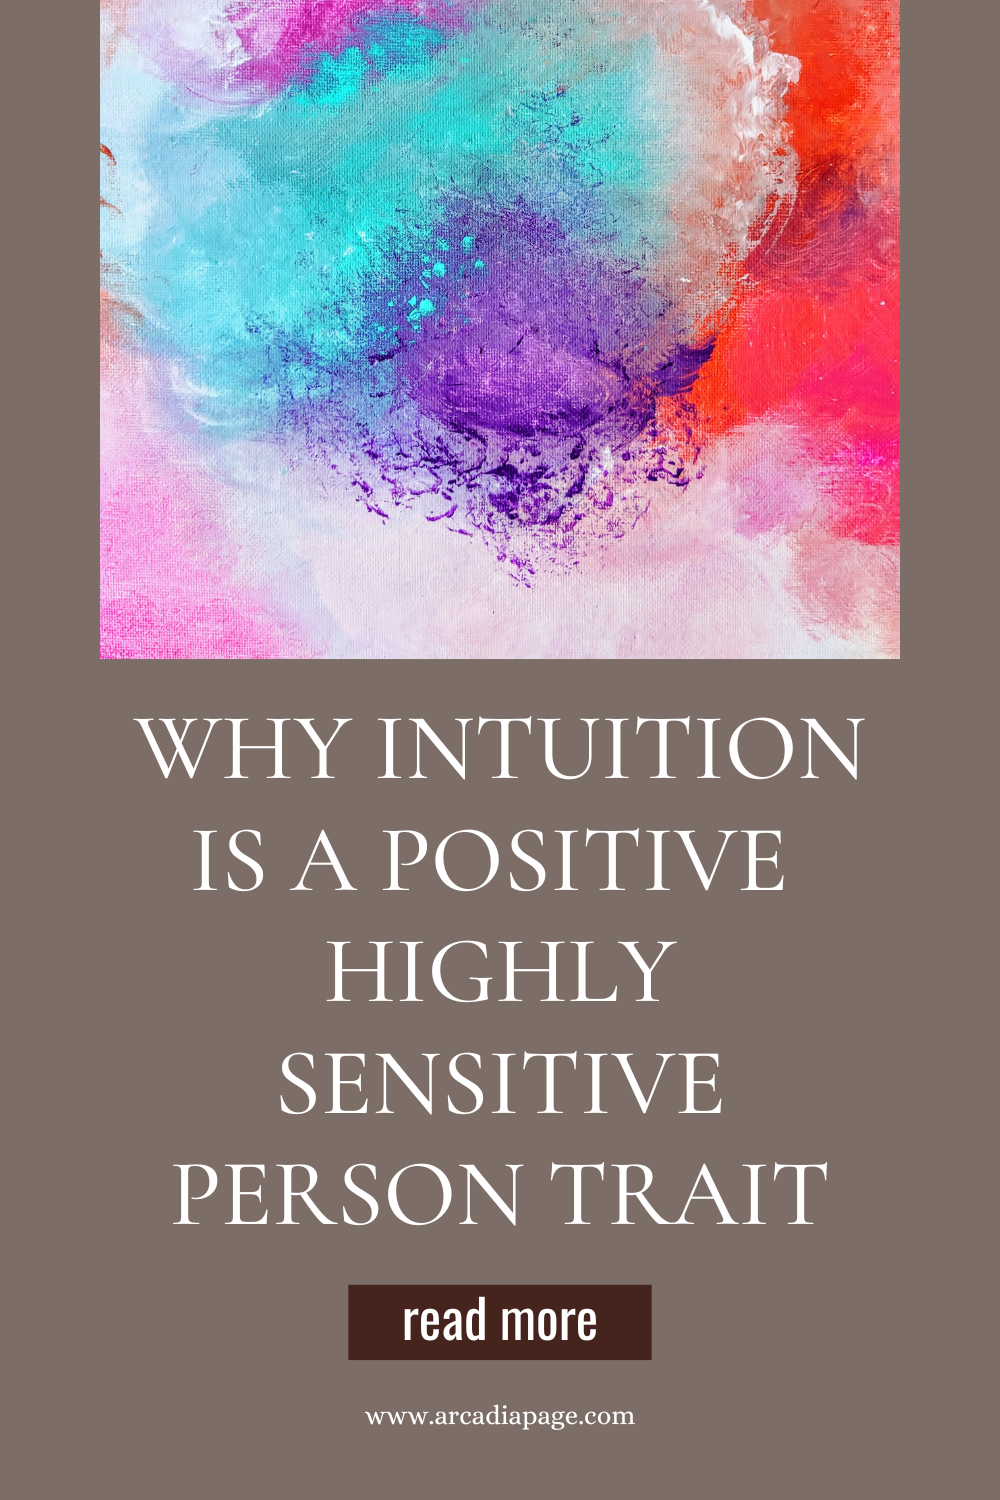 traits of highly sensitive person highly sensitive person good traits highly sensitive person trait